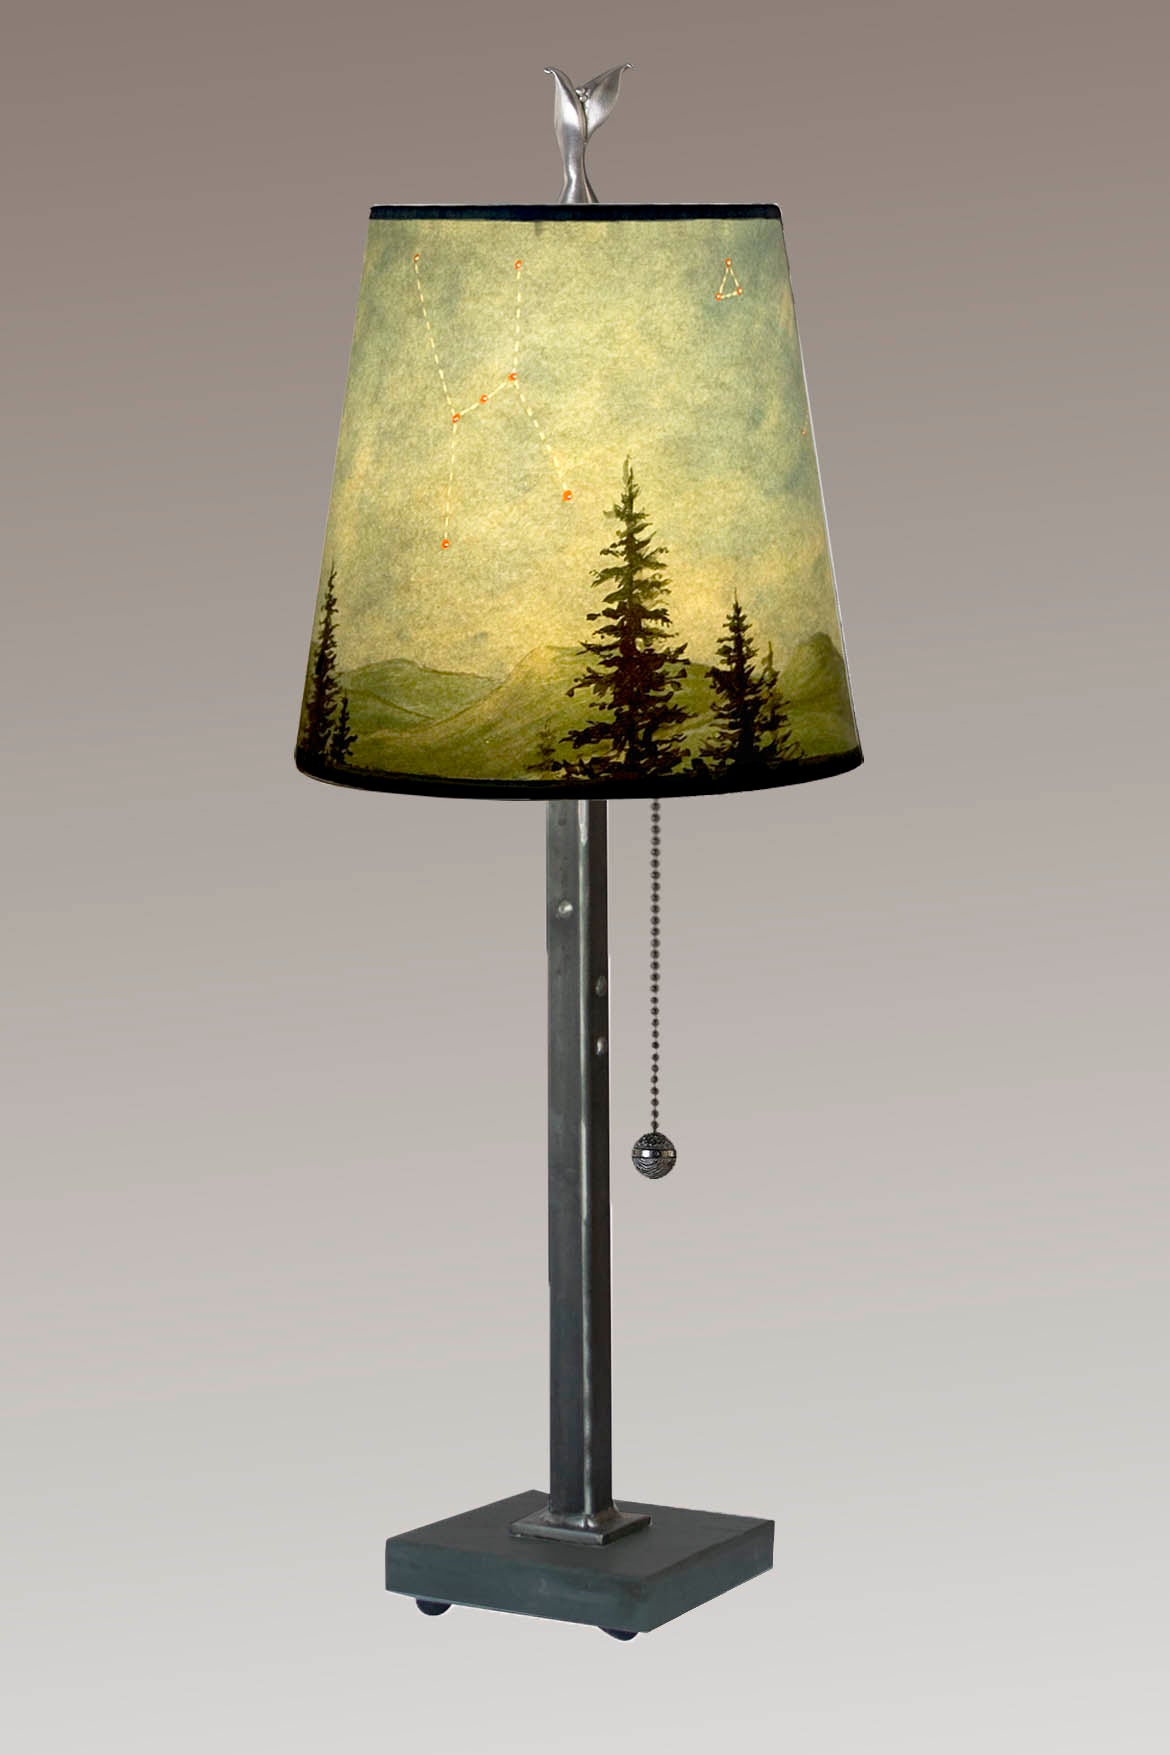 Janna Ugone &amp; Co Table Lamp Steel Table Lamp with Small Drum Shade in Midnight